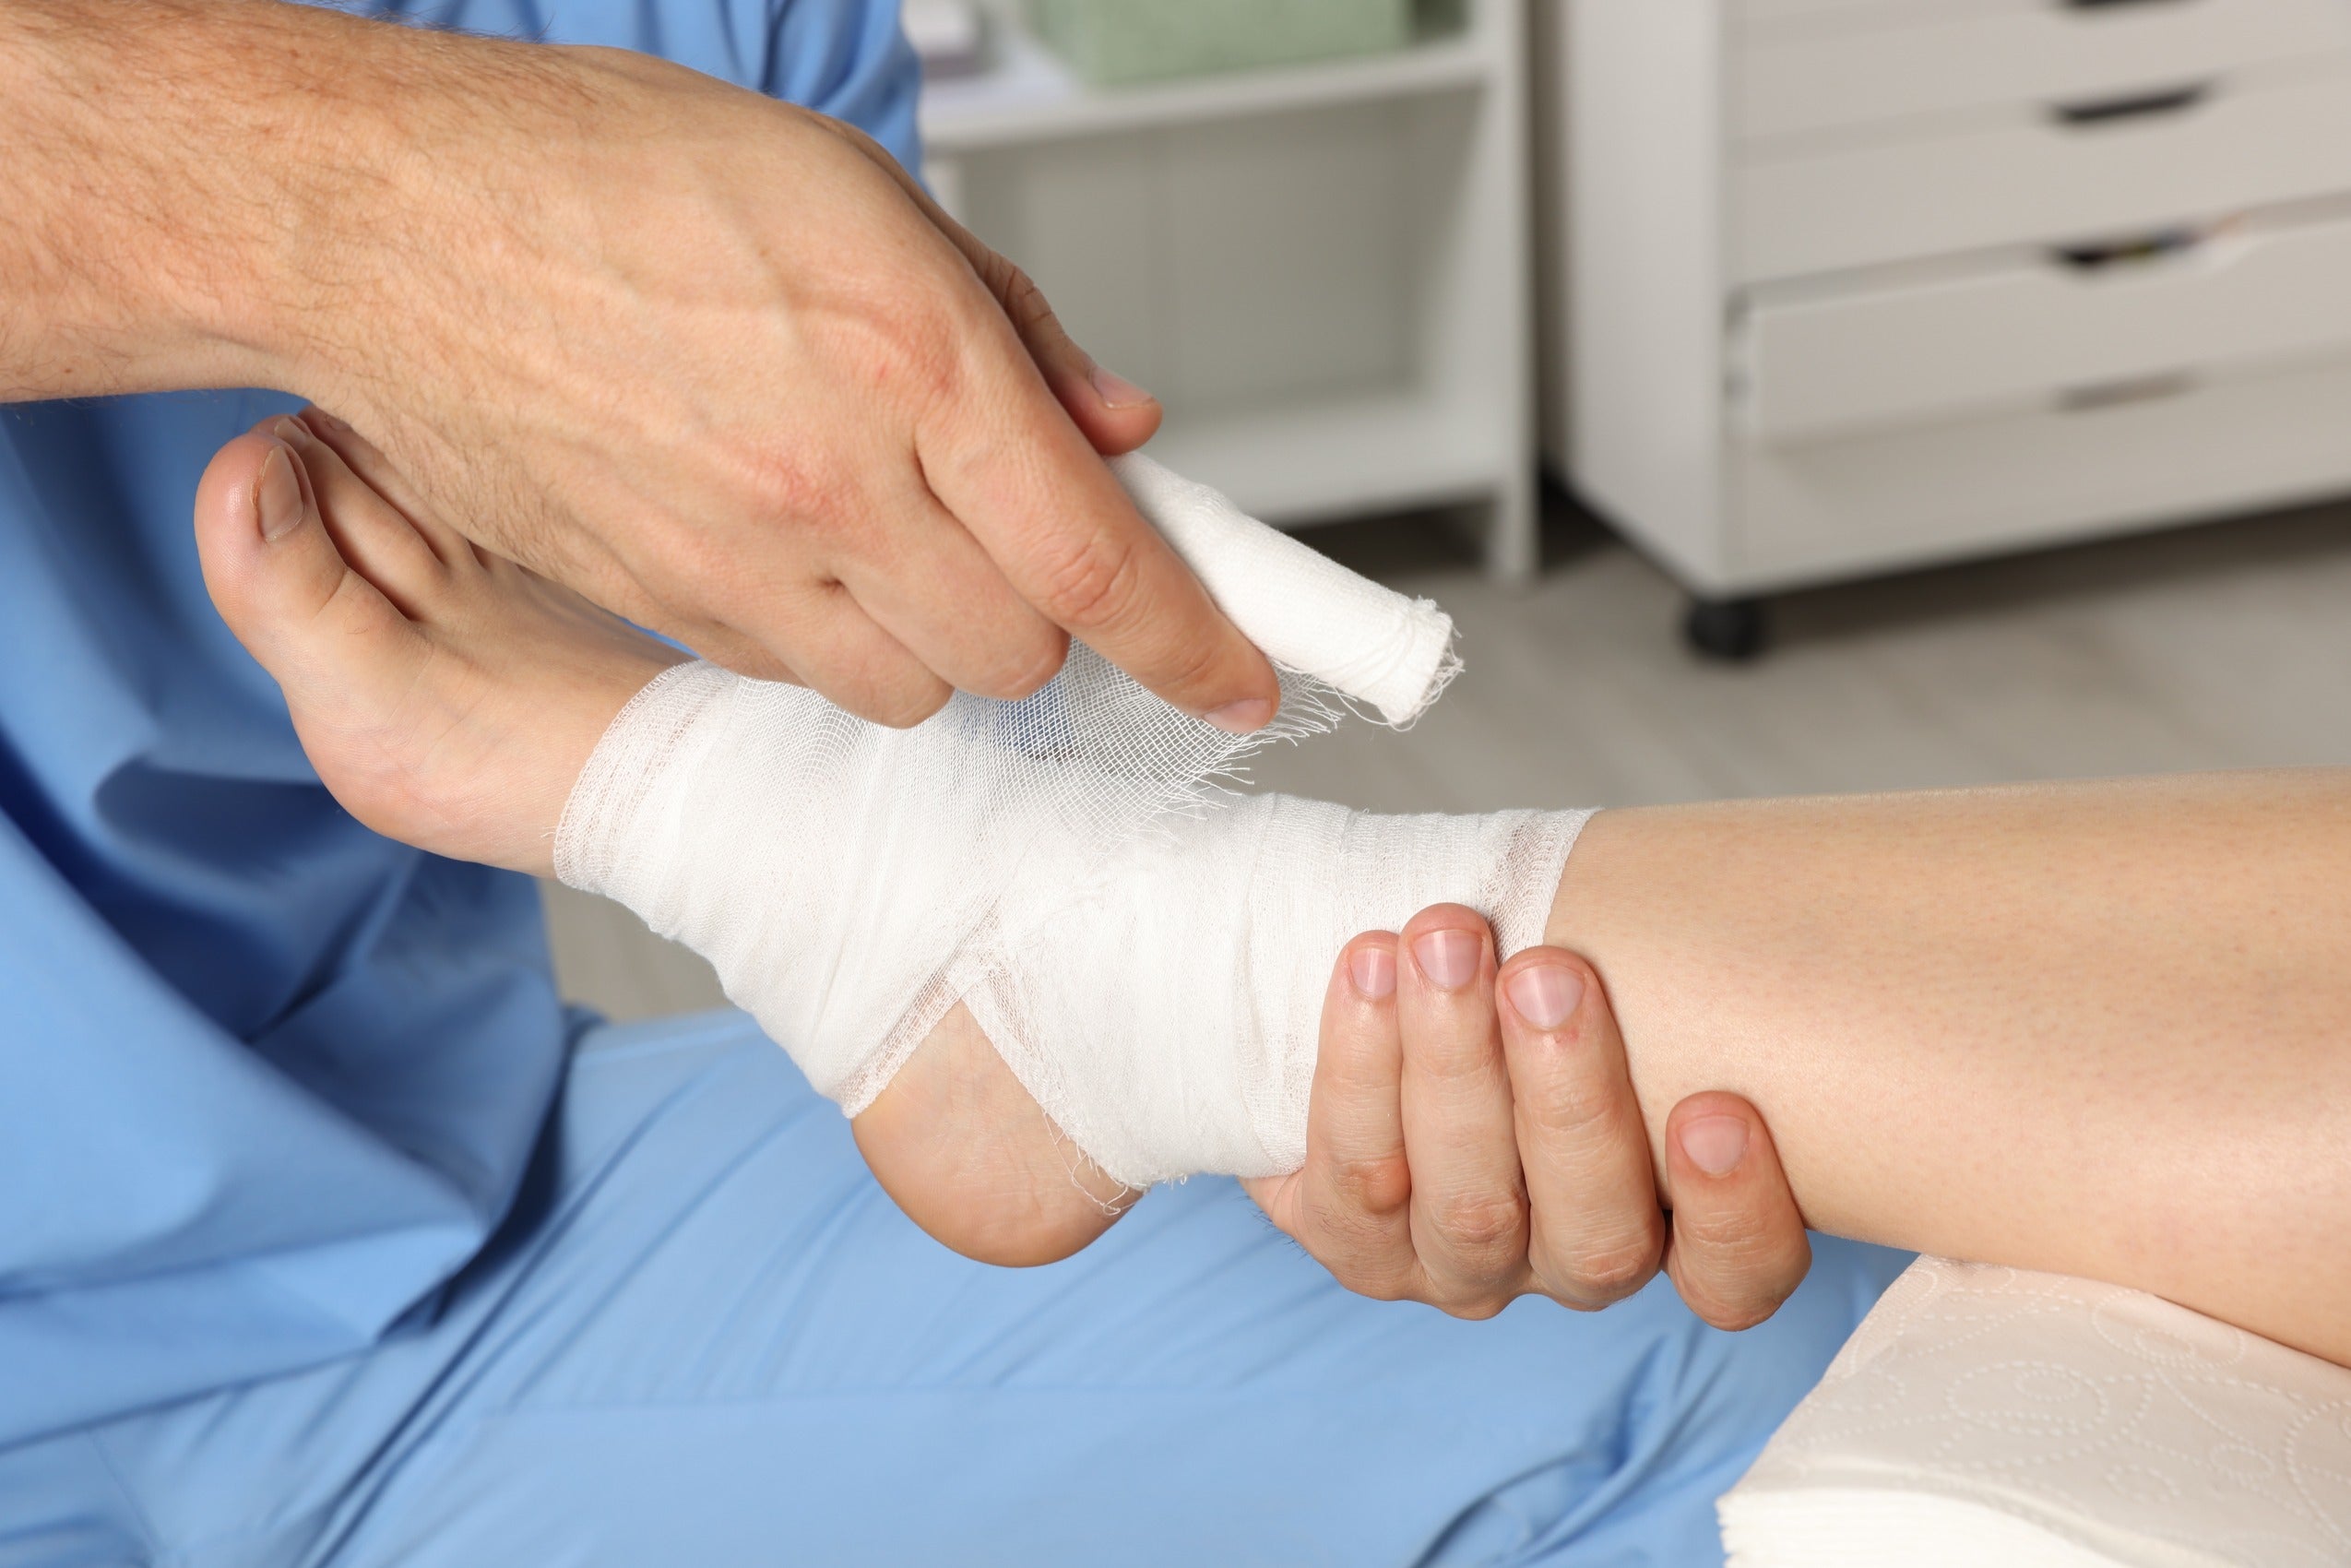 Managing Diabetic Wounds with Appropriate Dressings